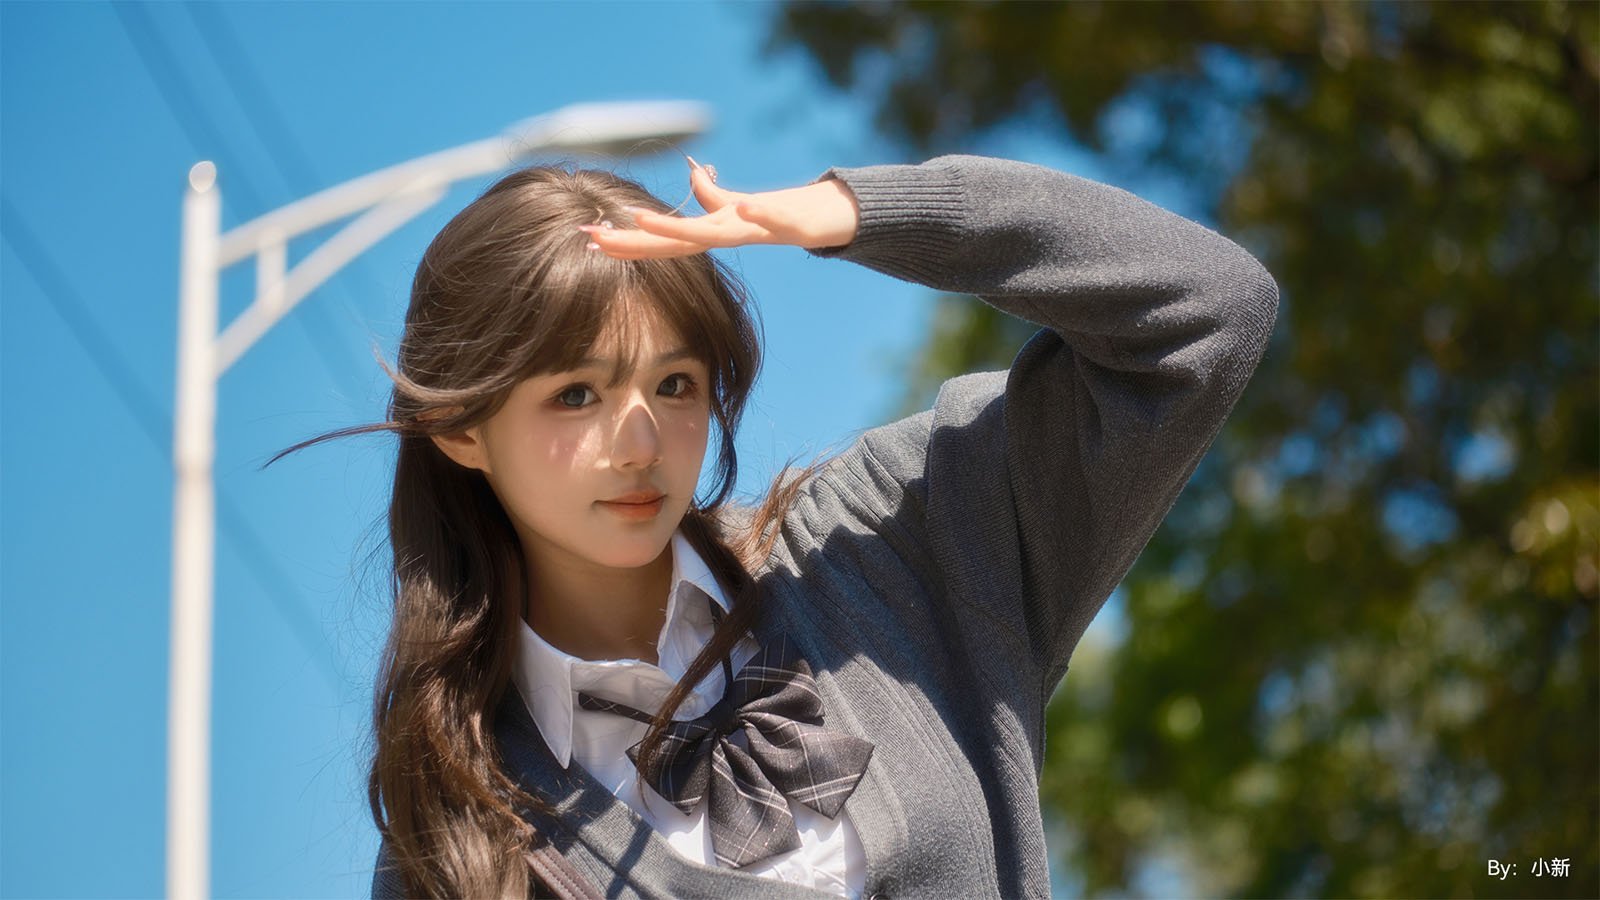 A young woman in a school uniform salutes the camera with her hand above her eyes, against a backdrop of clear blue skies and blurred greenery.